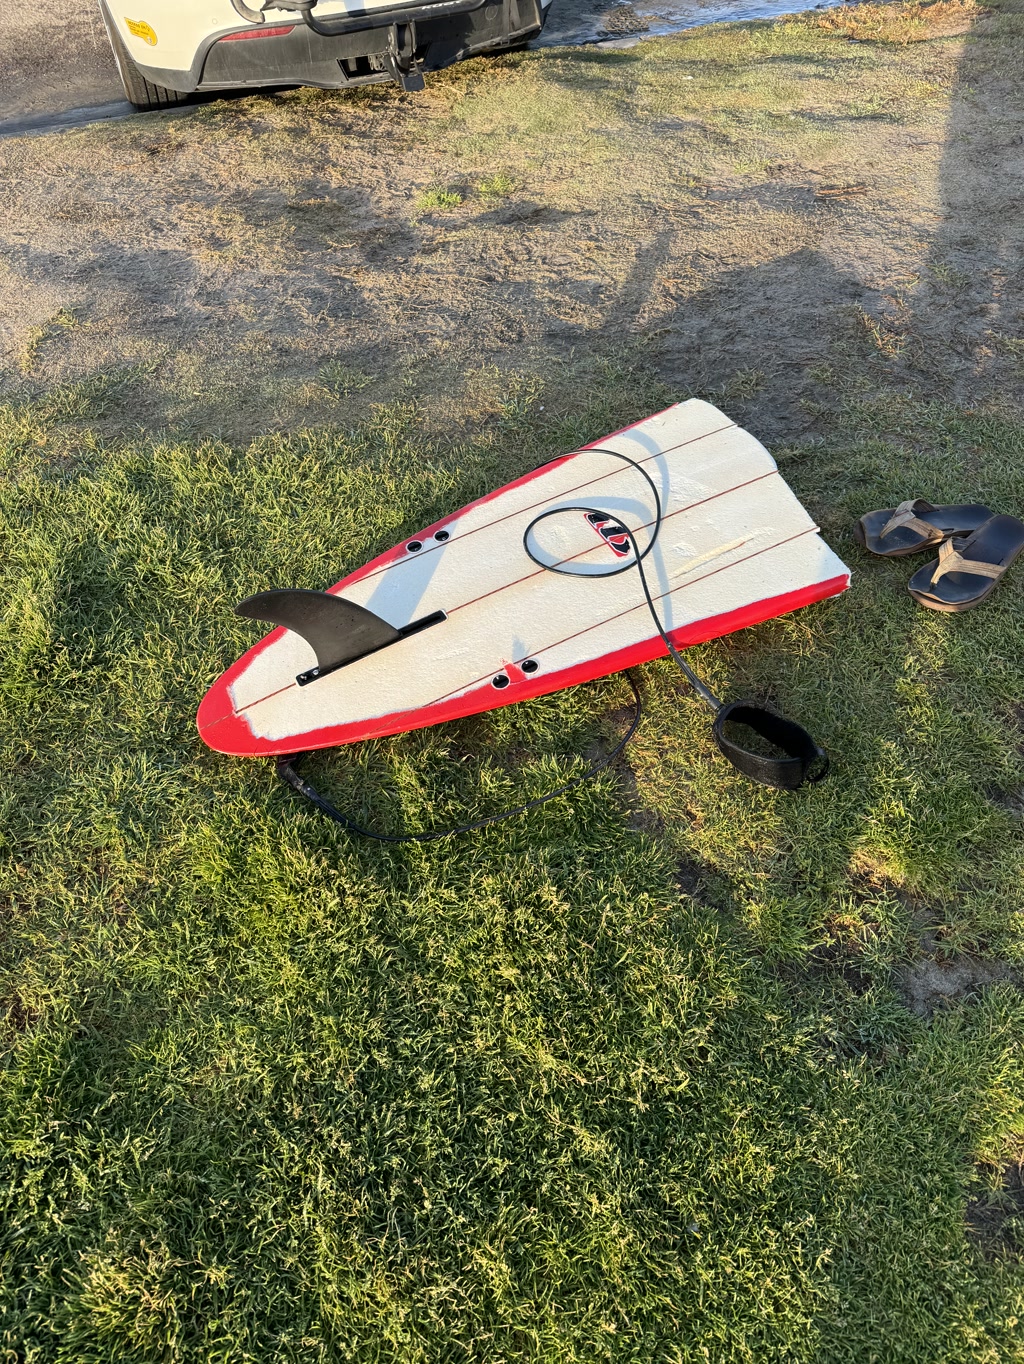 A red paddleboard with white borders is lying on the ground with the fin attached and ready for use. There is a black coiled leash attached to the board. Also visible are a pair of black flip-flops placed next to the board, and a black round object that appears to be a speaker or a container. Behind the board, there's a portion of a vehicle visible, which looks like the rear end of a van or SUV, showing the bumper, taillight, and a bit of the rear wheel. The ground shows a mix of grass and patches of dirt, suggesting this might be a transition area near a lake, river or beach used to enter or exit the water. The setting is illuminated by bright sunlight casting shadows on the ground, indicating it's either morning or late afternoon.